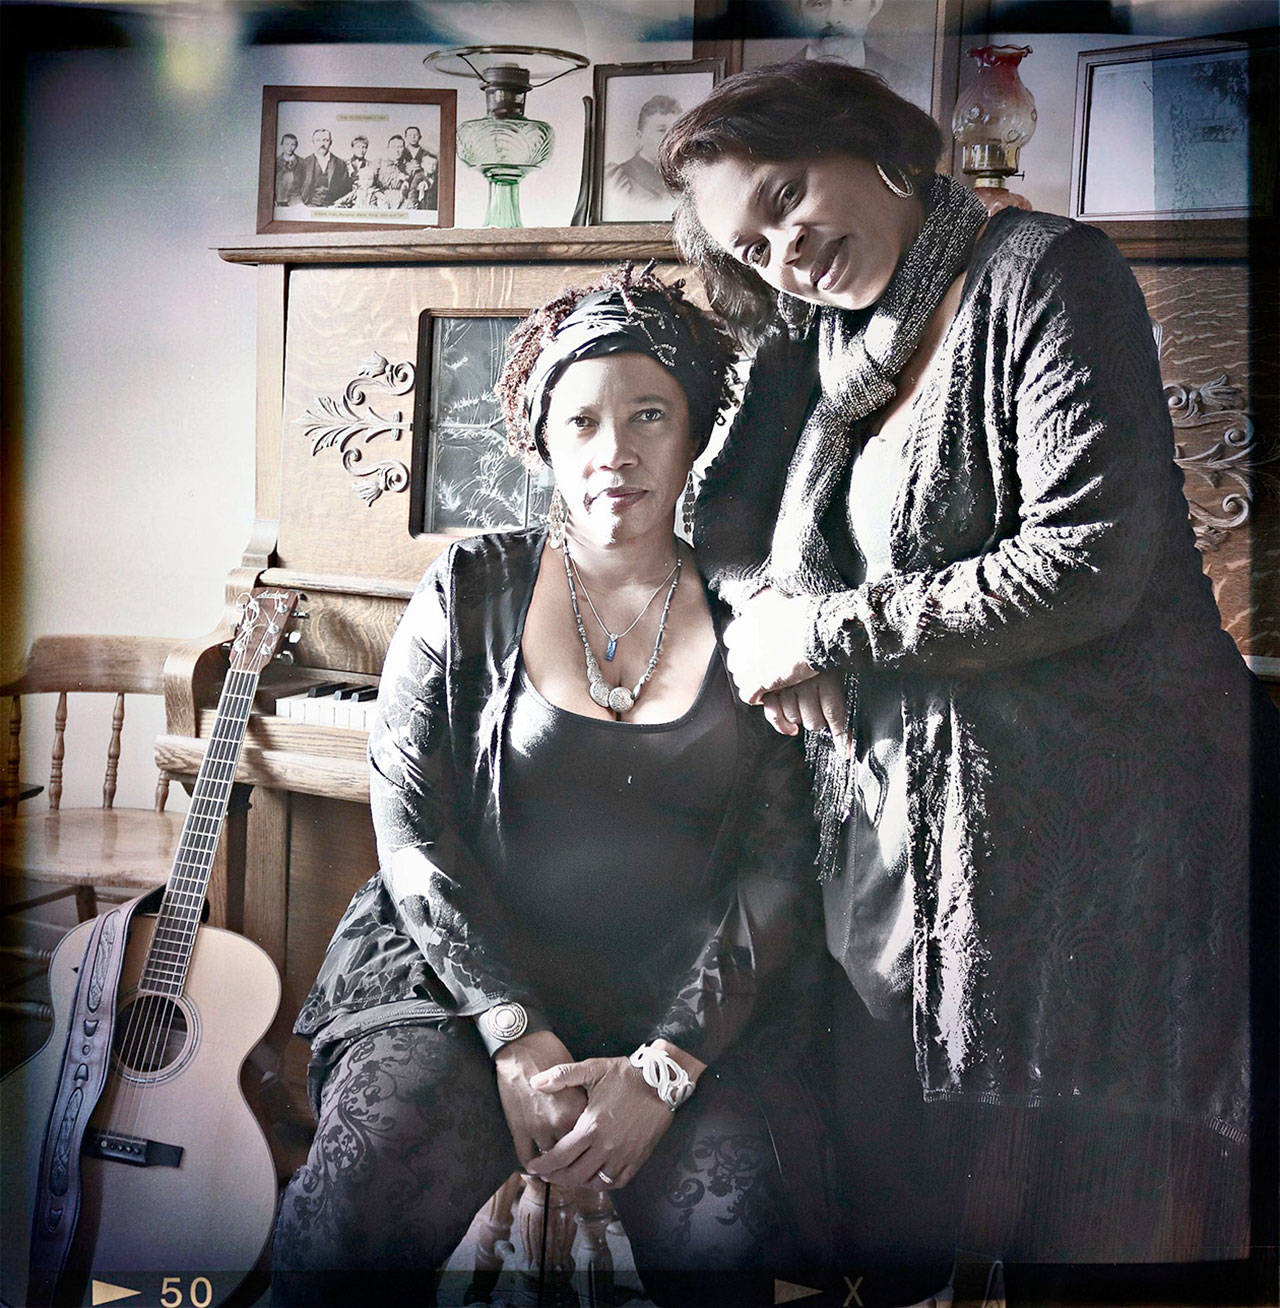 Karen “Brown Sugar” Hayes, right, and Lisa Sanders will perform as the Lisa Sanders Band in Coyle on Sunday. (Cathryn Beeks)